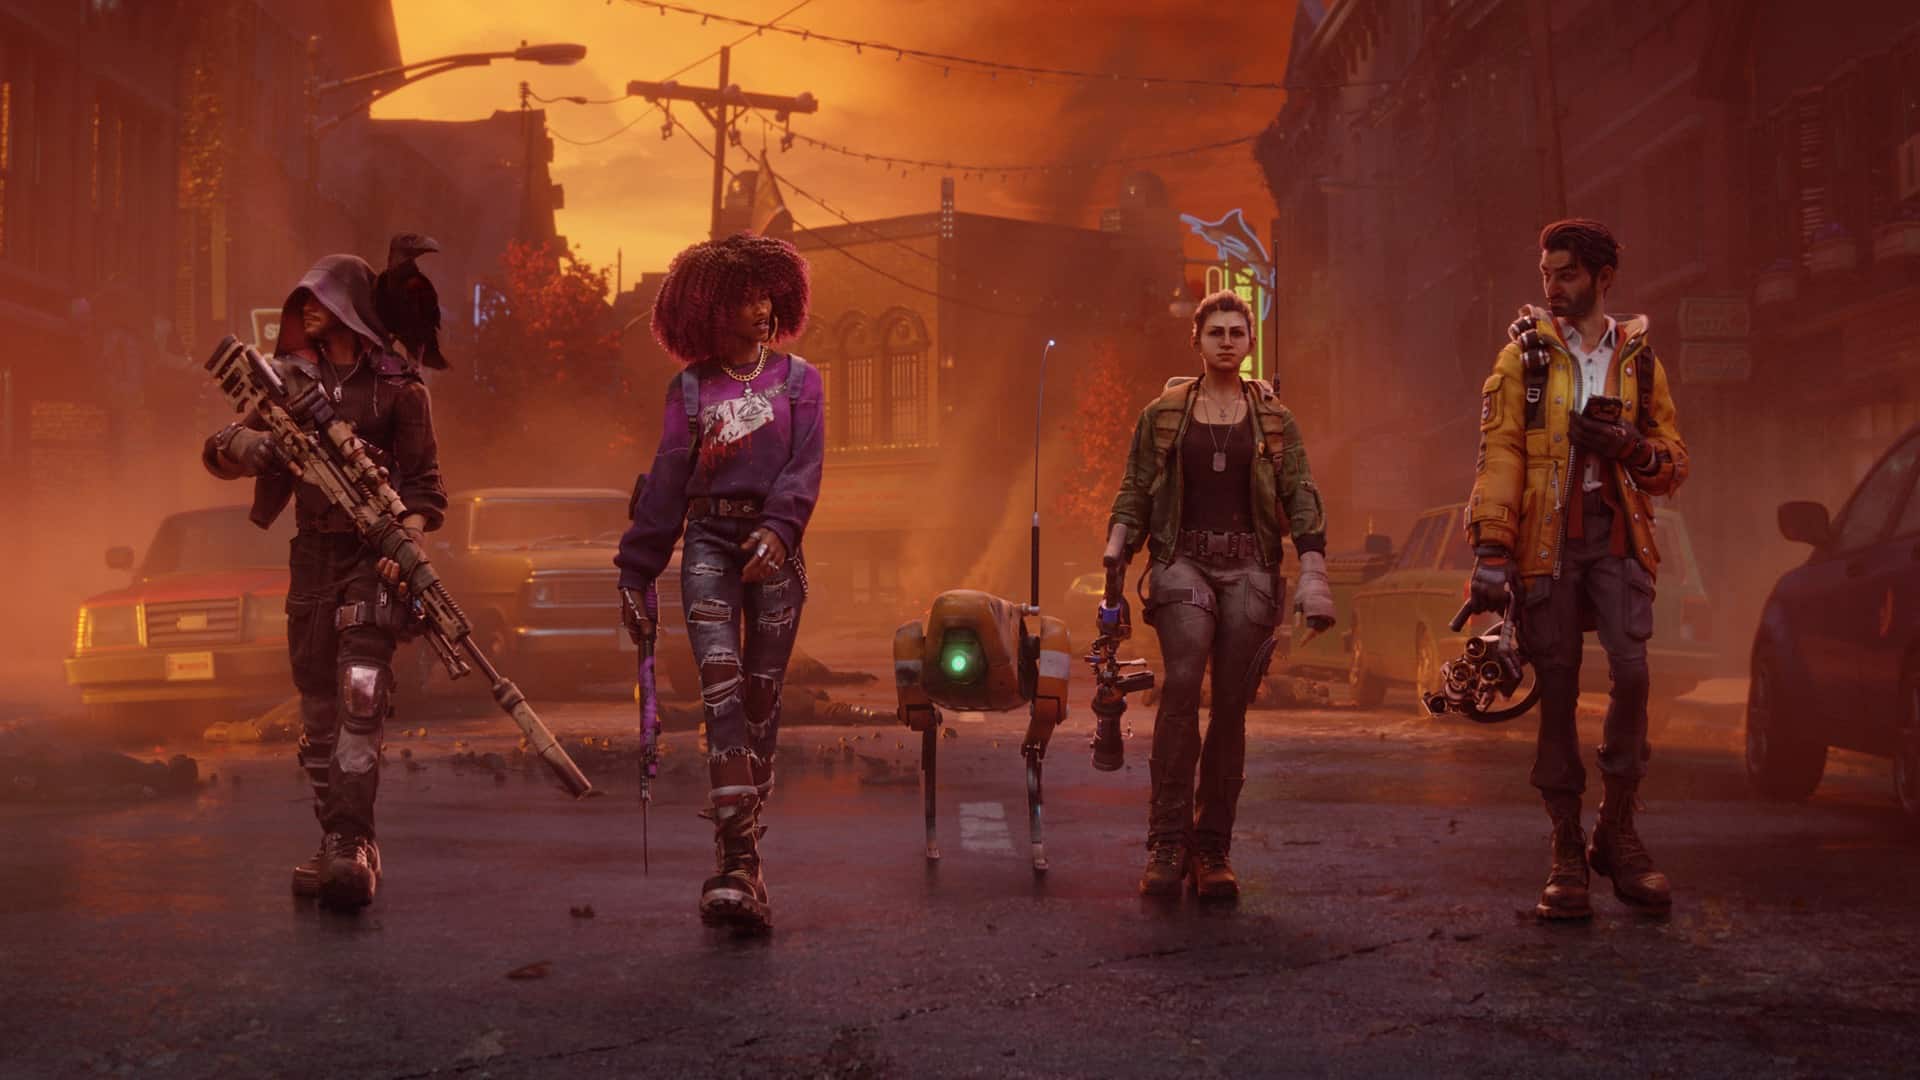 Main characters from Redfall shown in the cinematic reveal trailer